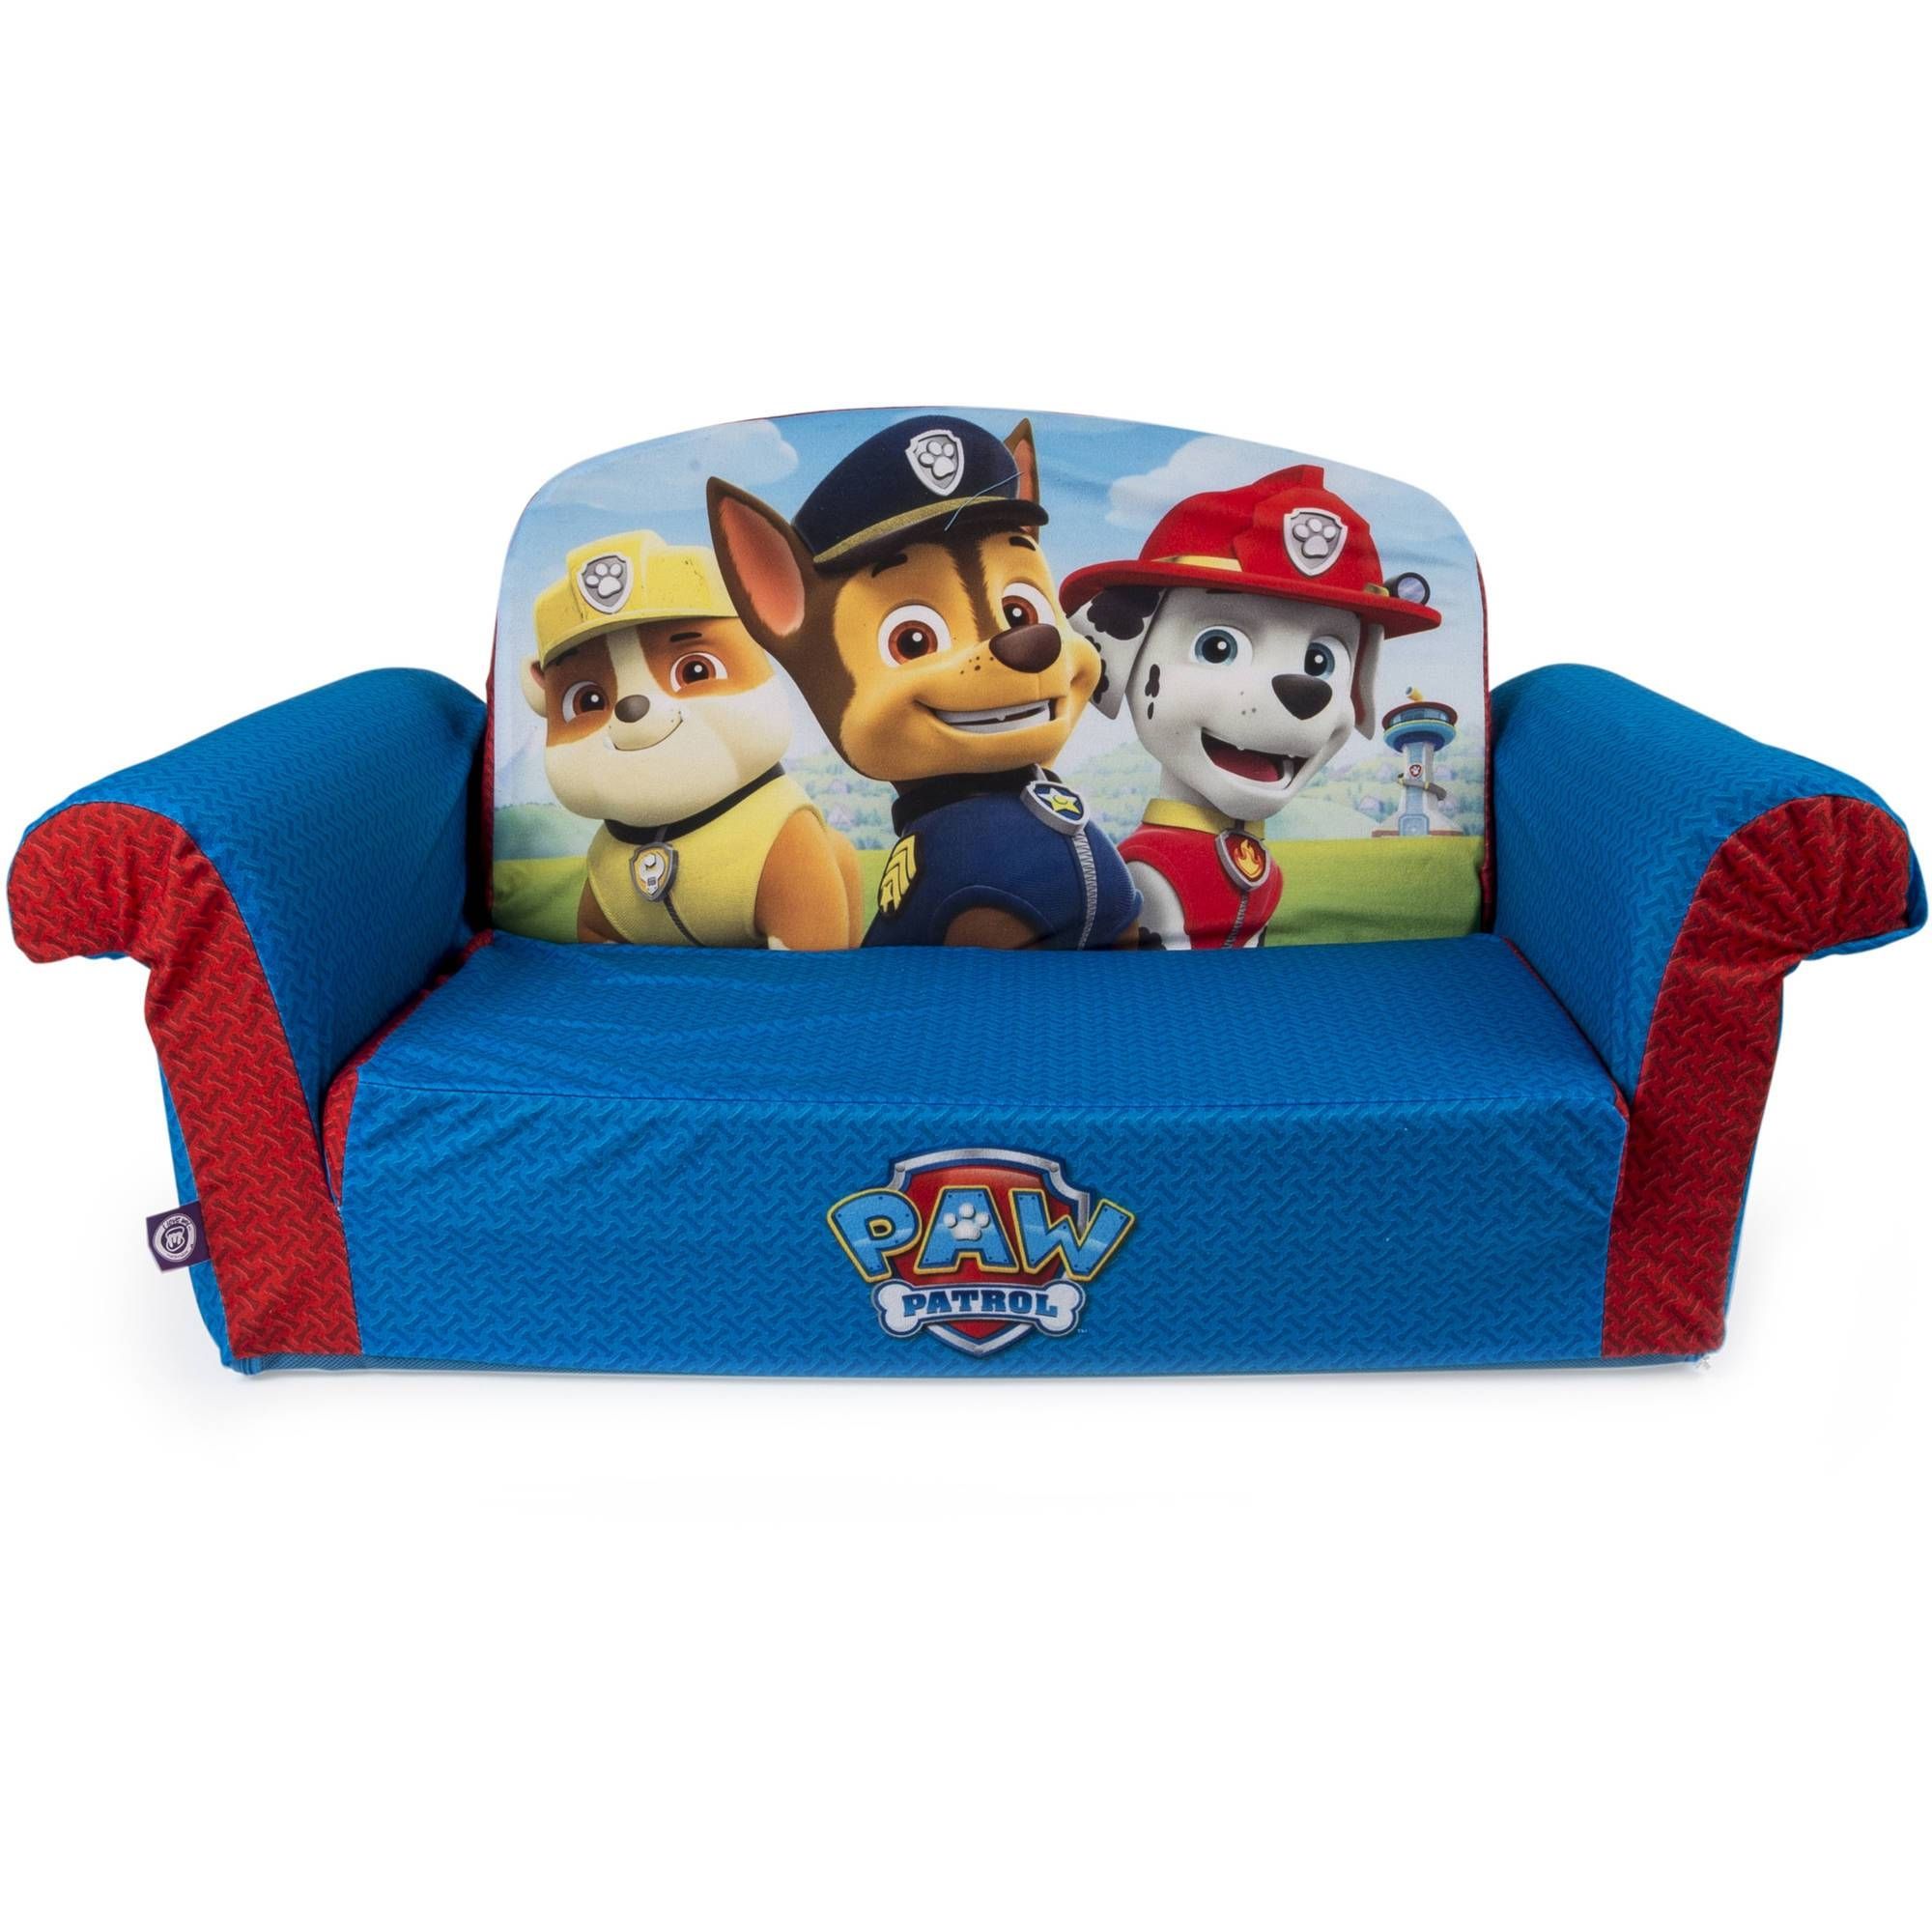 Marshmallow Furniture, Children's 2 In 1 Flip Open Foam Sofa Pertaining To Flip Out Sofa For Kids (View 16 of 30)